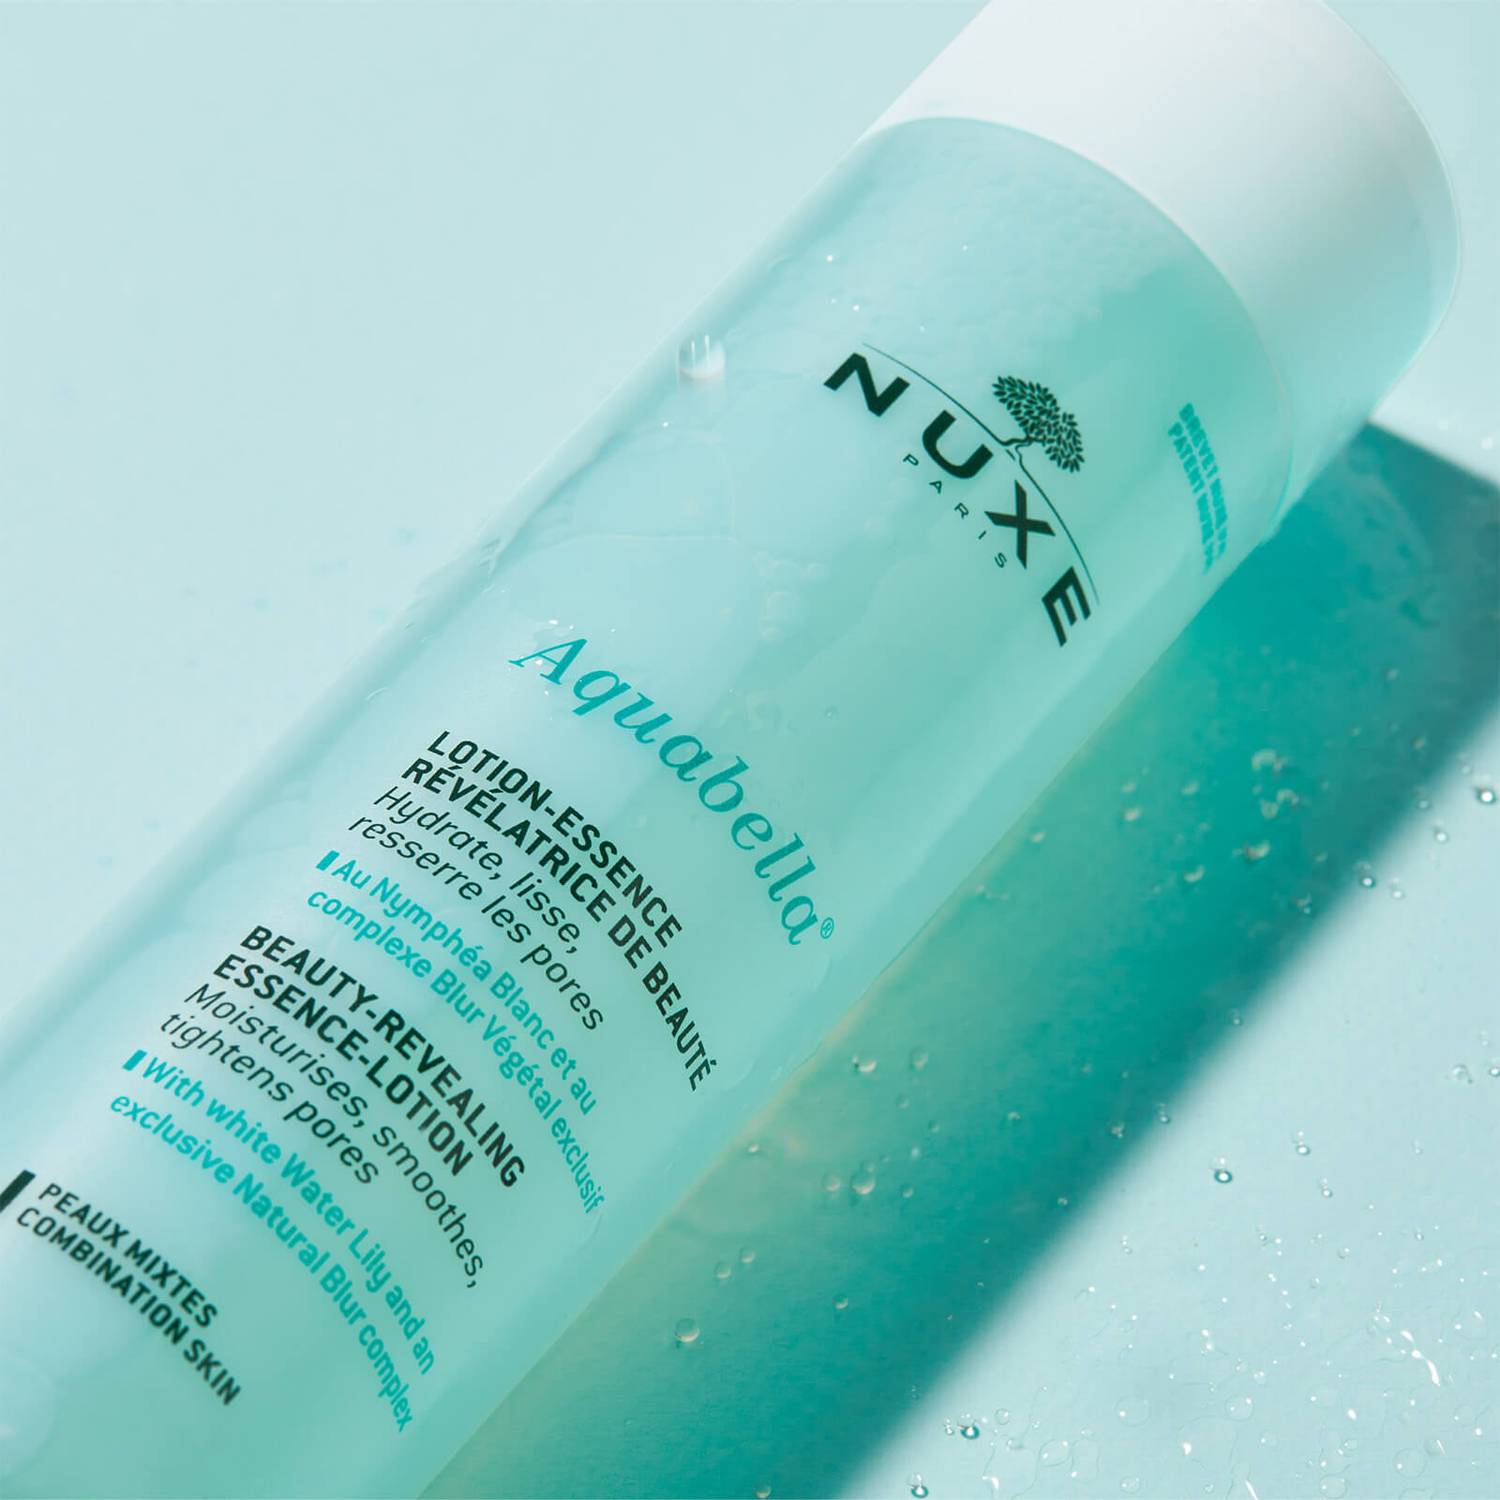 With Nuxe Beauty-Revealing Essence-Lotion, Aquabella  Pores are tightened, skin surface is refined, & complexion is brighter.